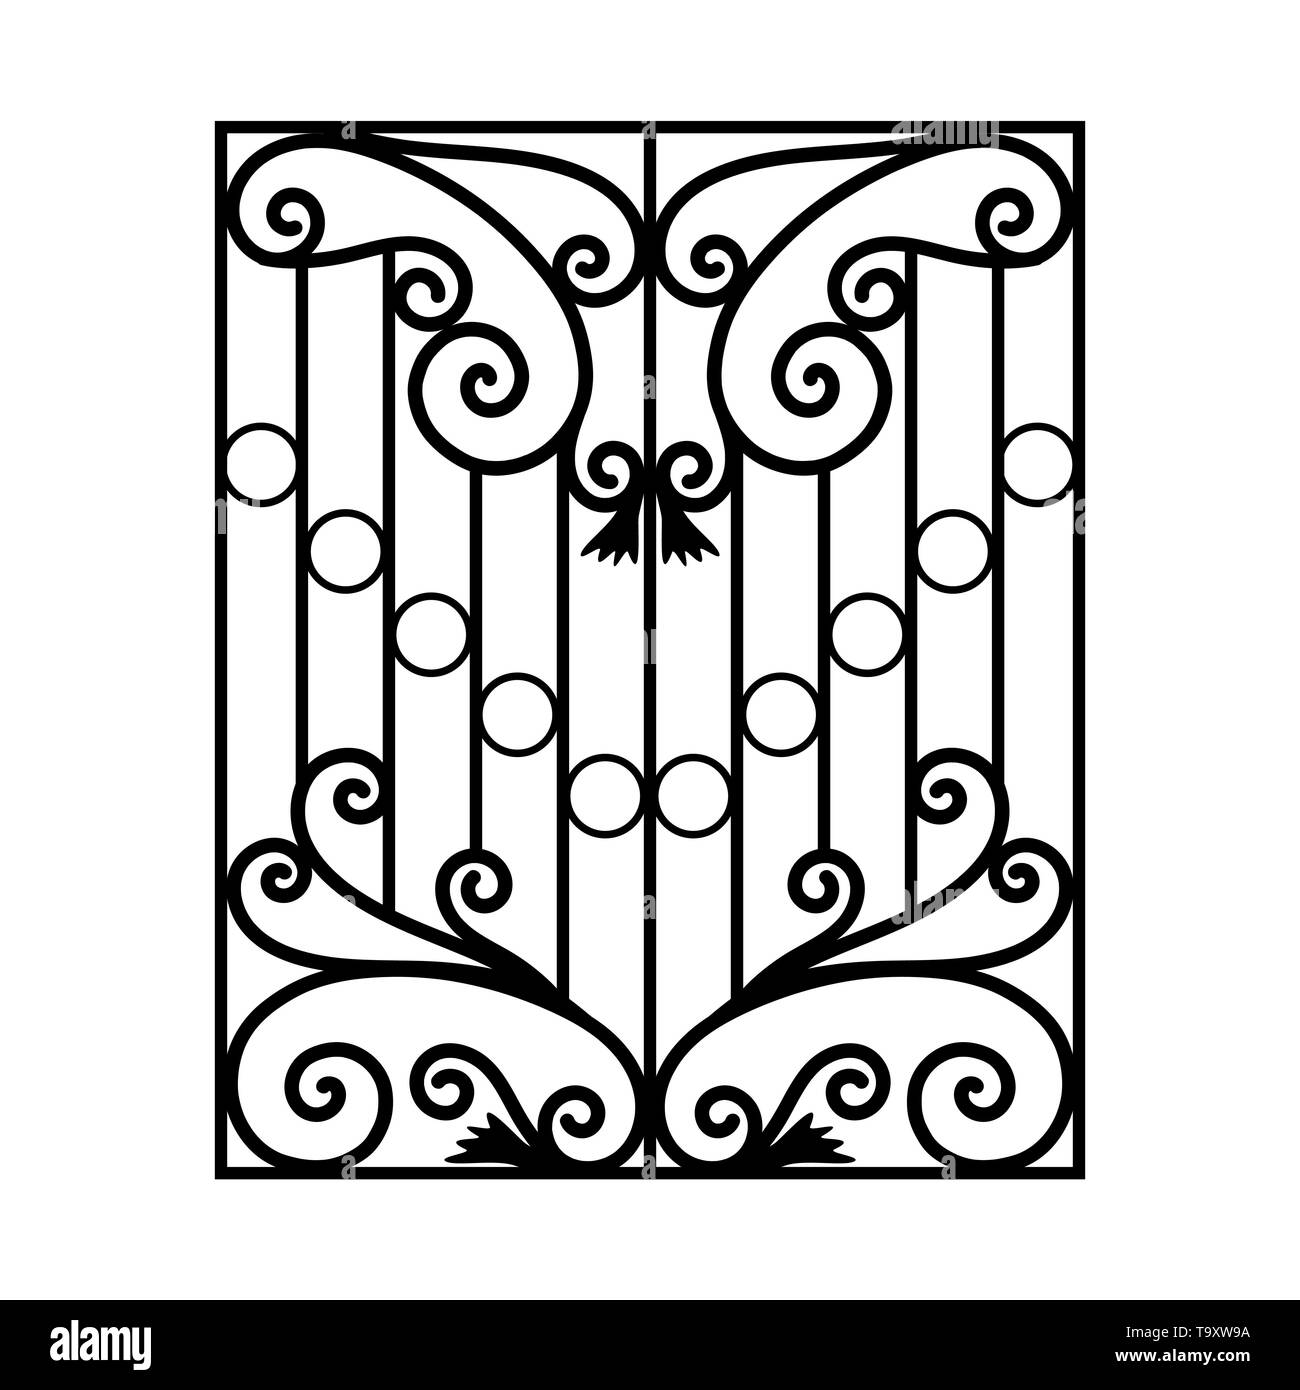 Iron window grills. Window railing vector image black paint with dimension on the white background eps10 Stock Vector